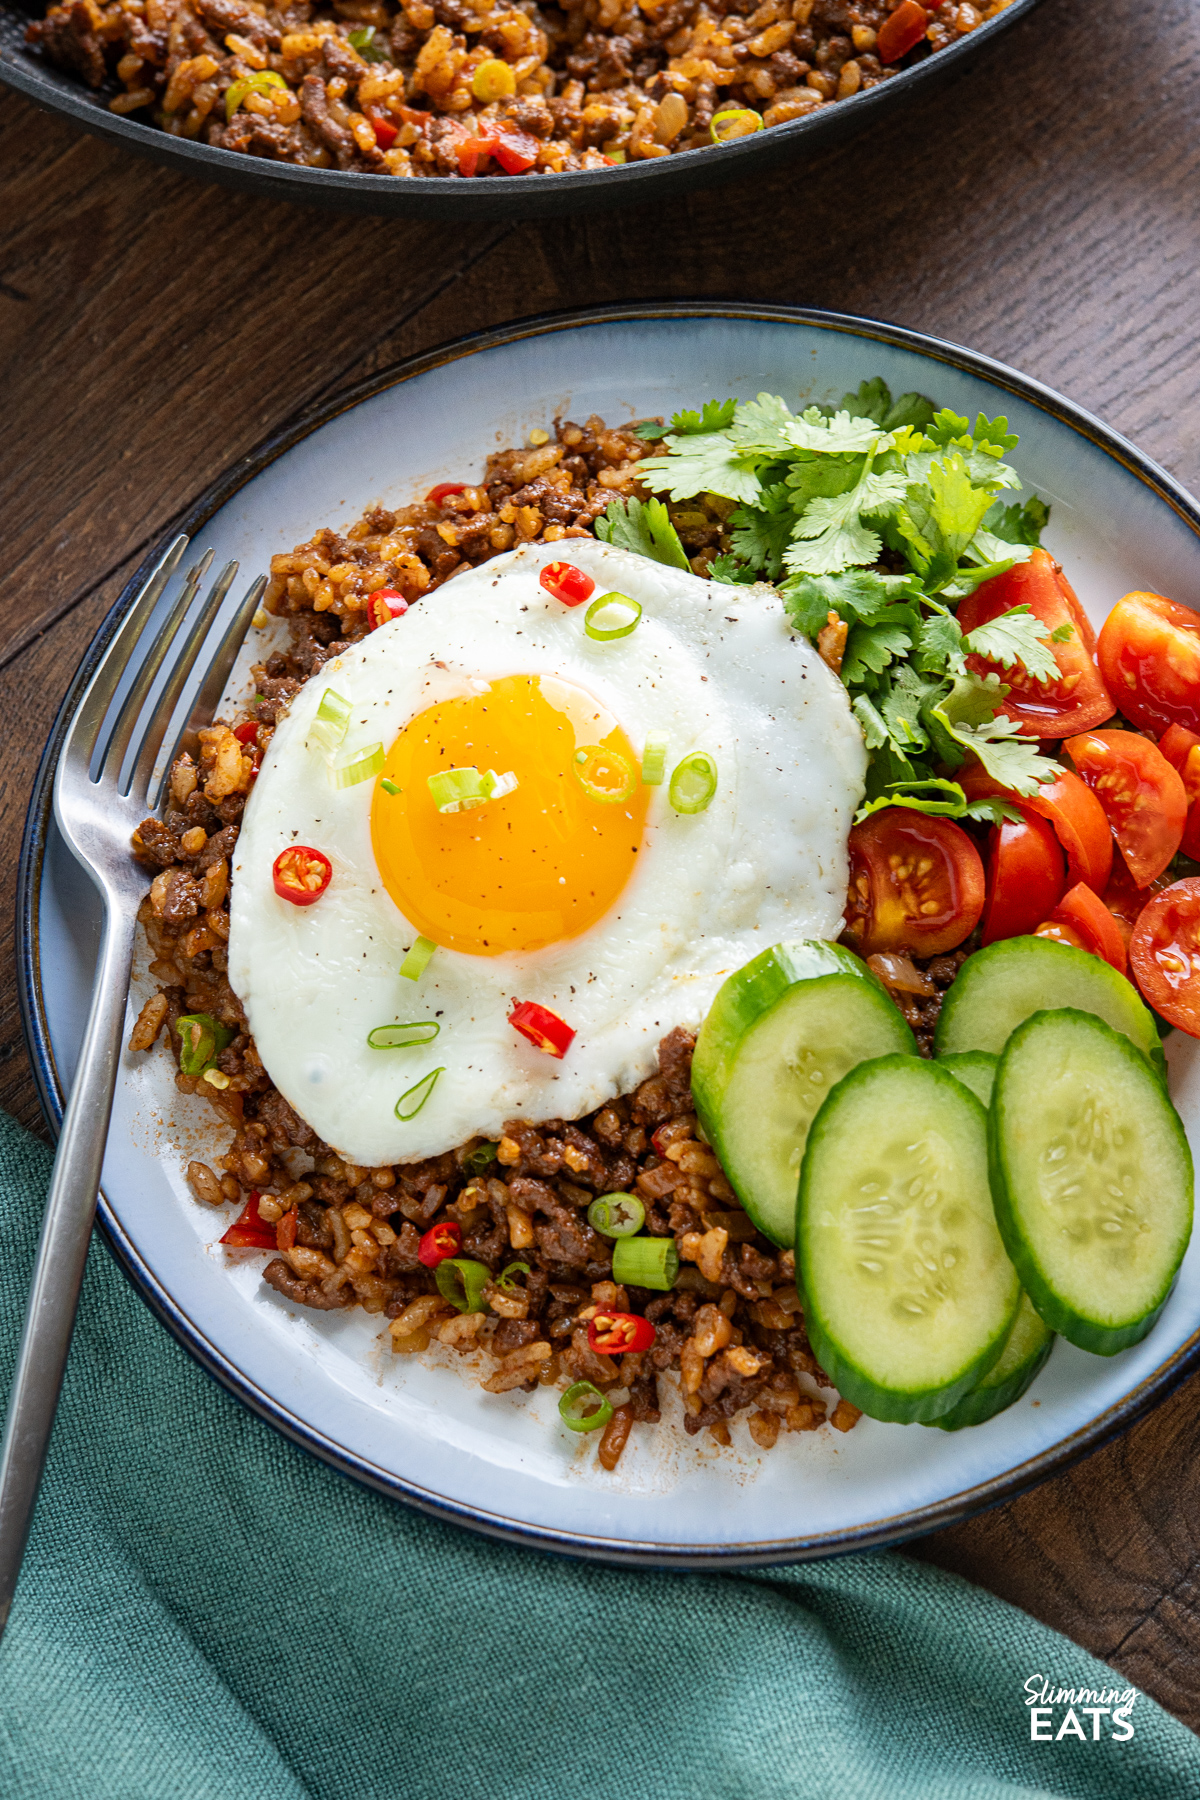 Served up nasi goreng topped with fried egg and served with tomatoes and cucumber in a pale blue bowl with navy rim.